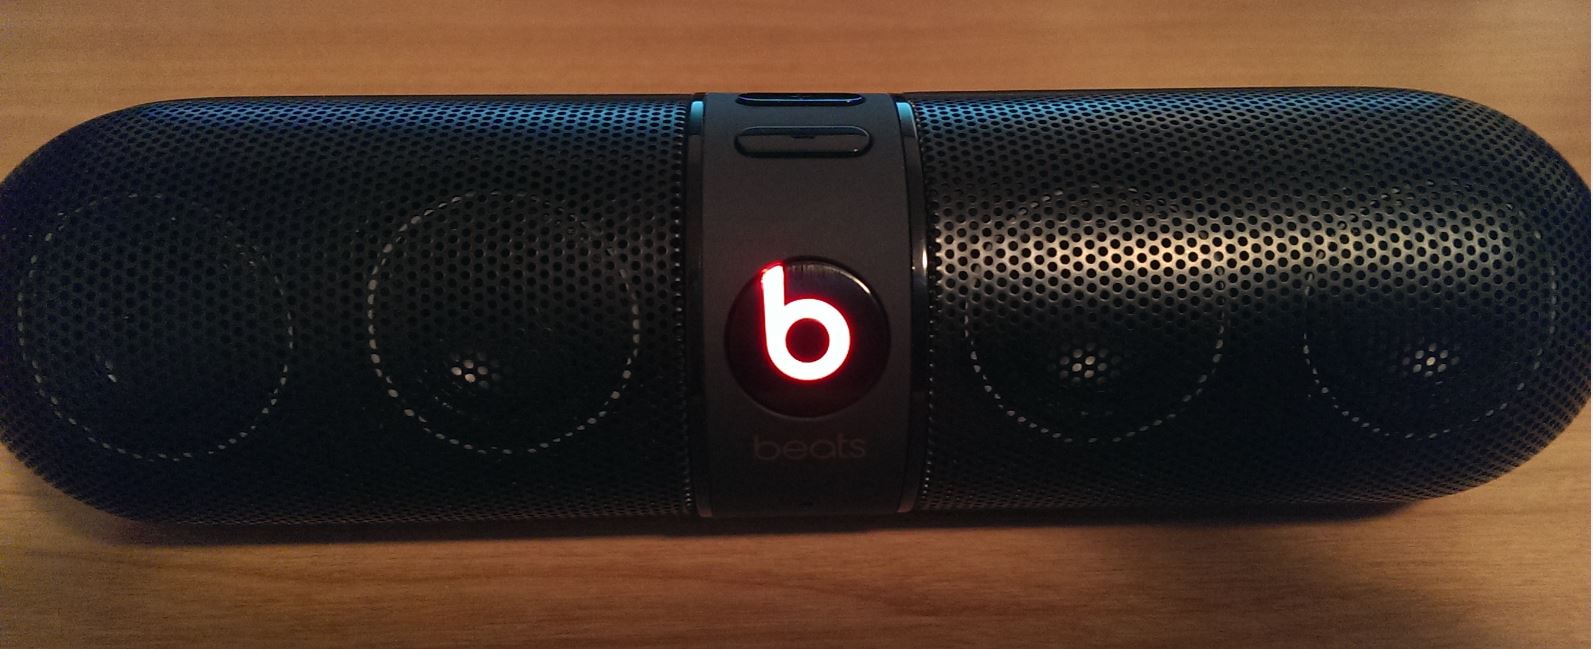 beats pill charging light stays red